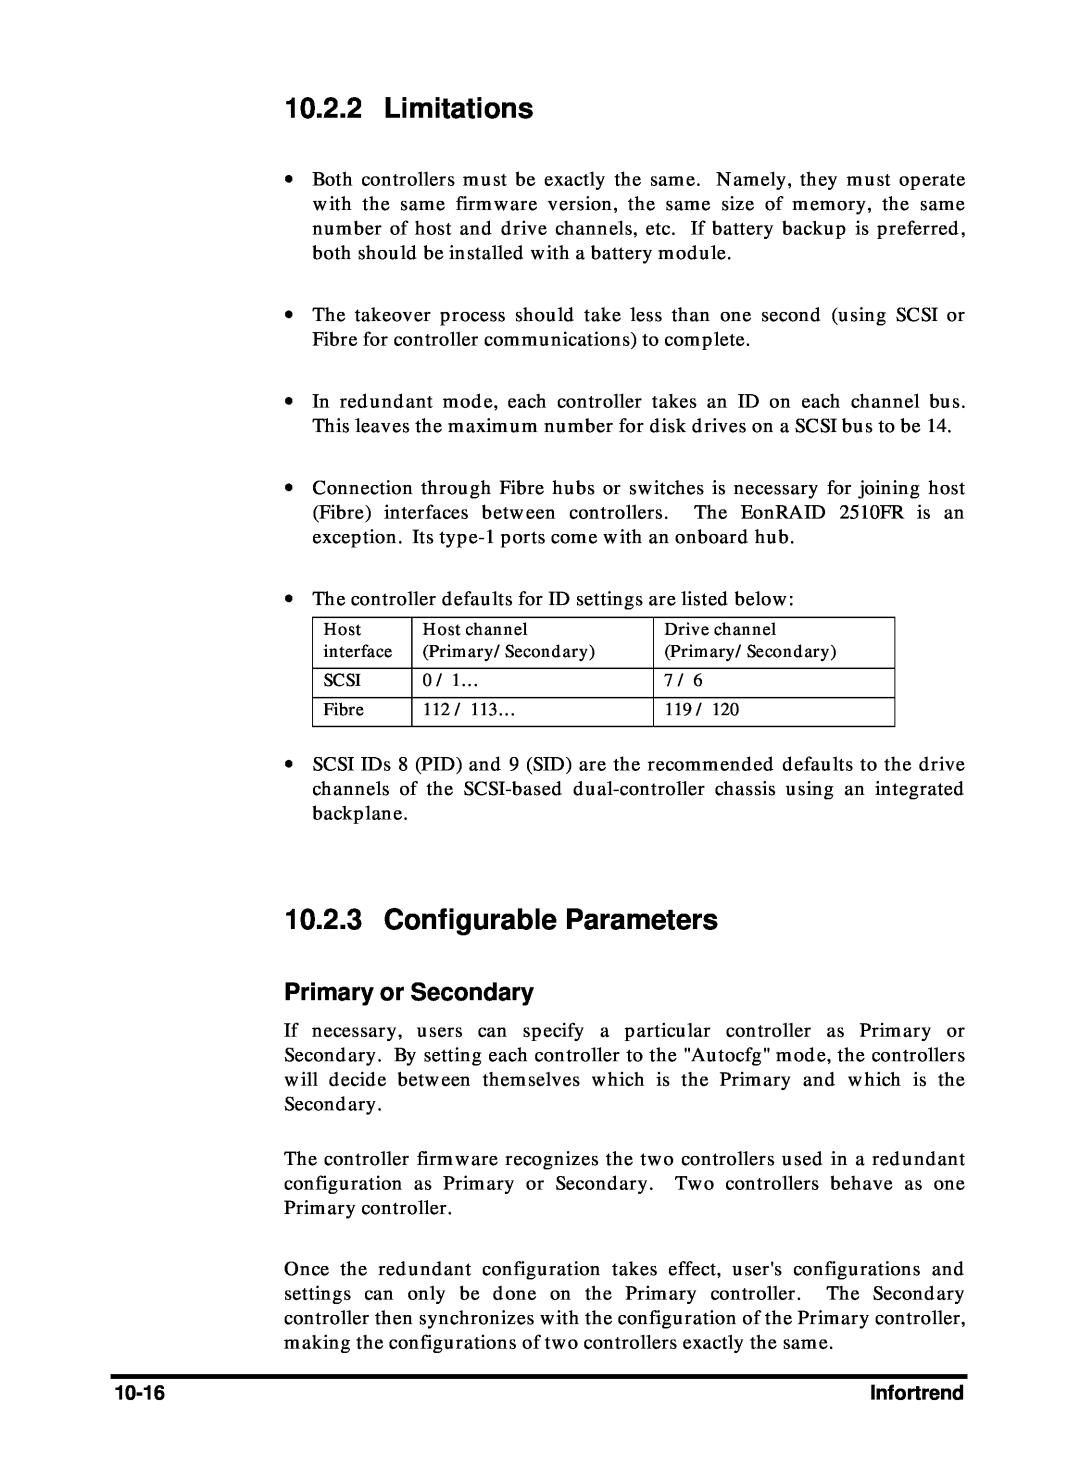 Compaq Infortrend manual Limitations, Configurable Parameters, Primary or Secondary 